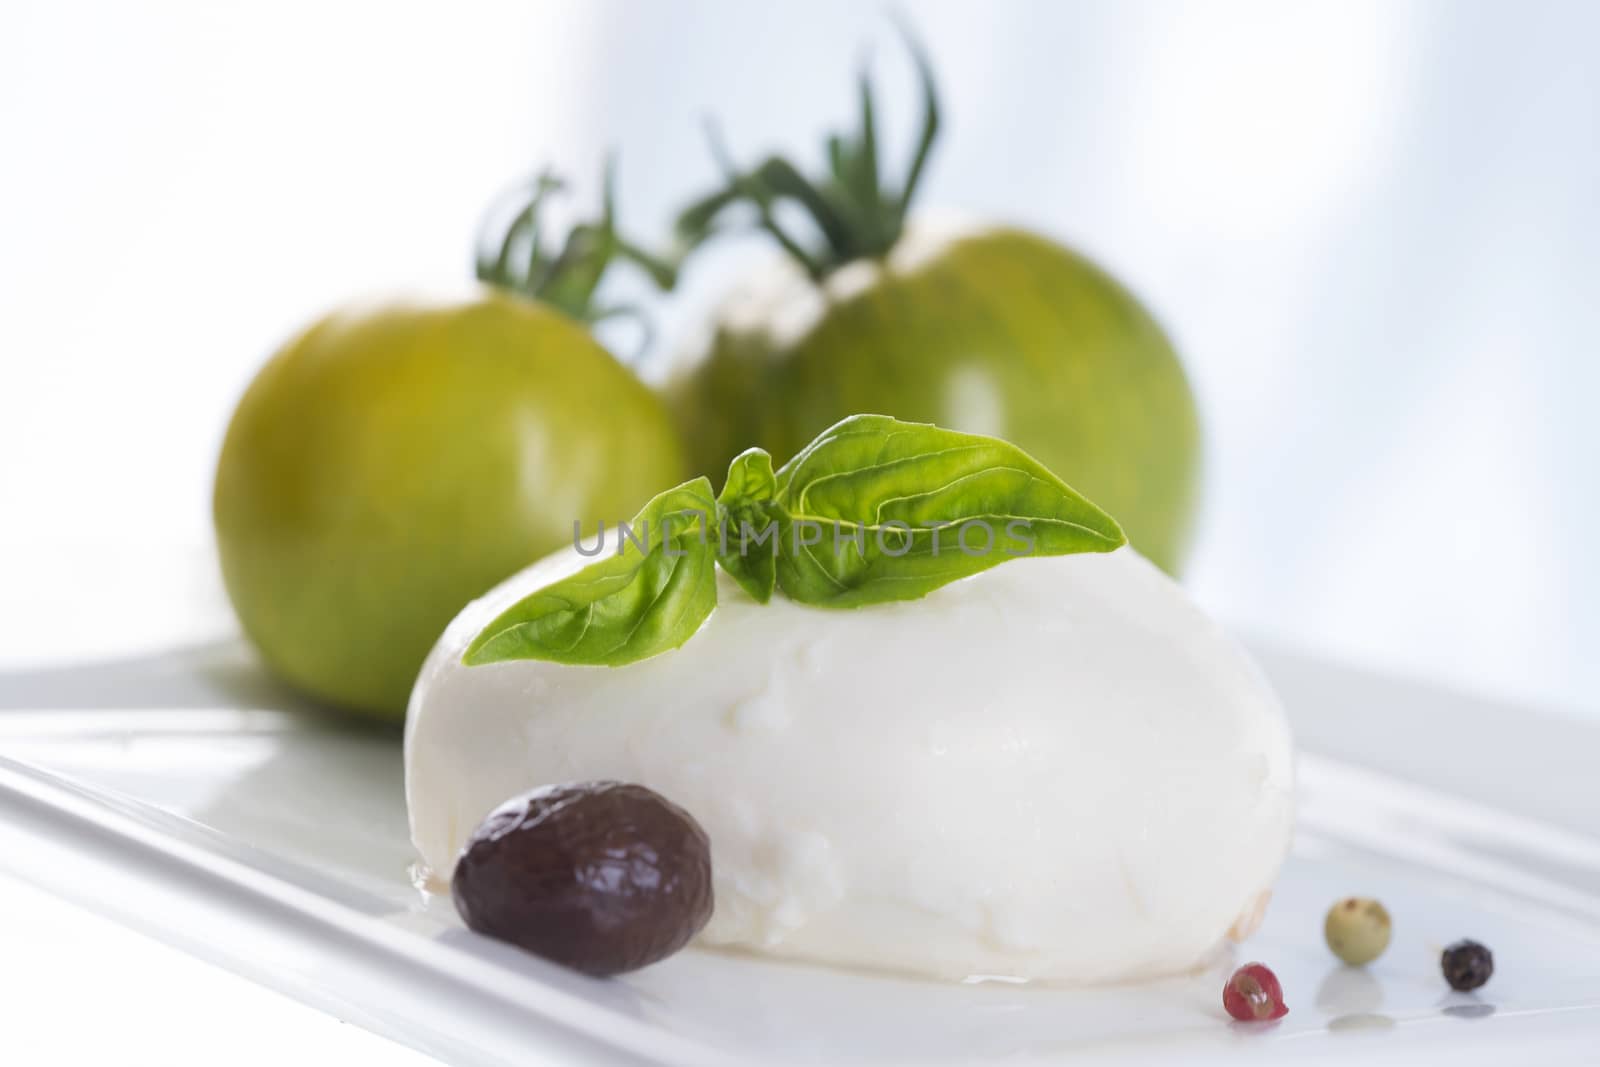 mozzarella with tomatoes and basil.  by JPC-PROD